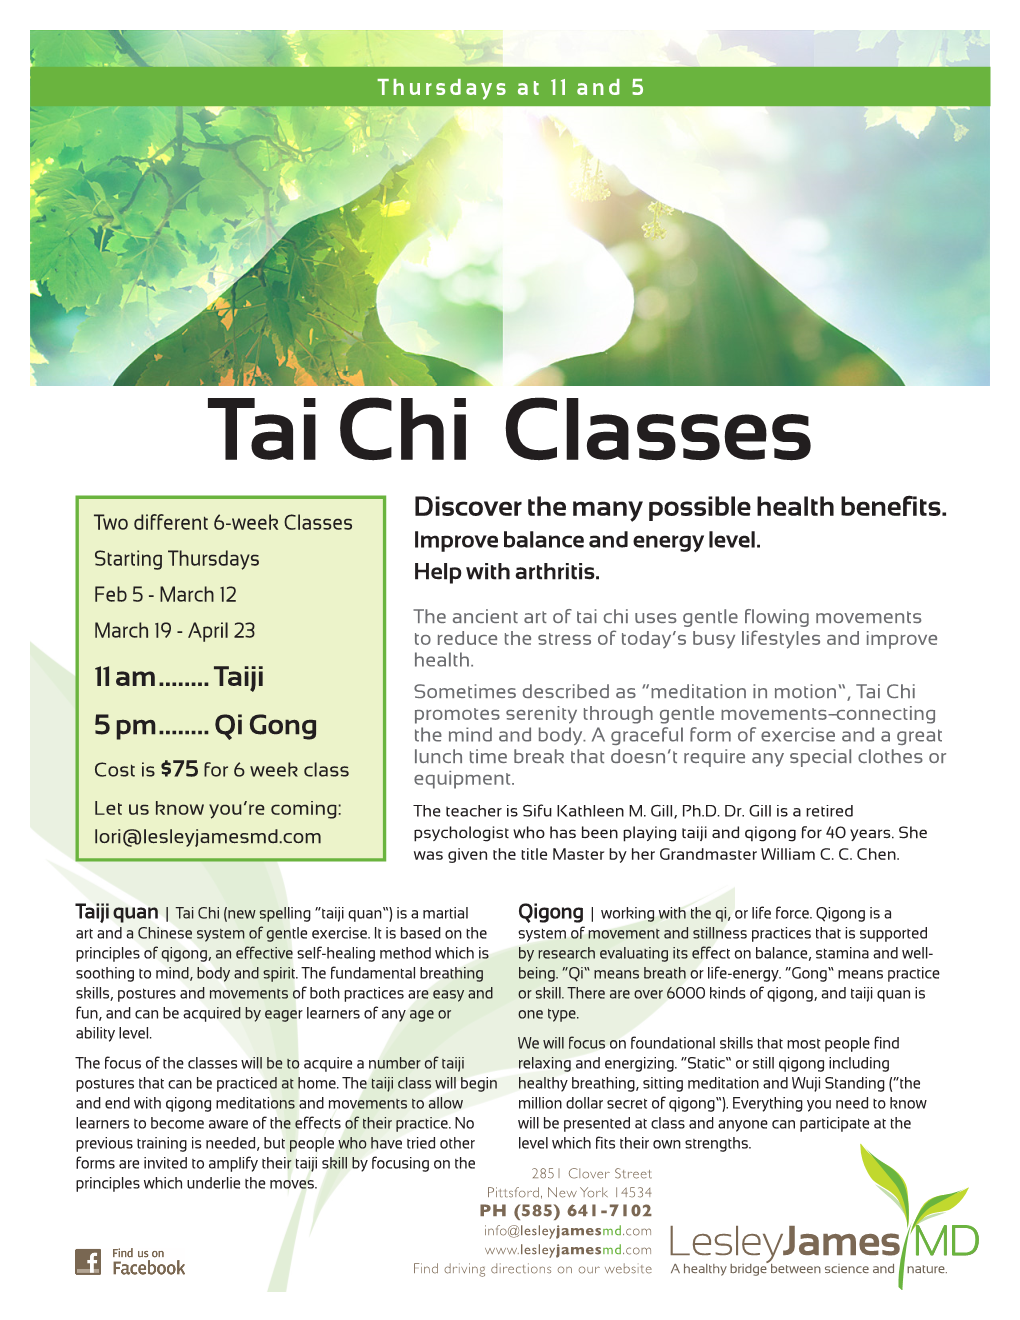 Tai Chi Classes Discover the Many Possible Health Benefits